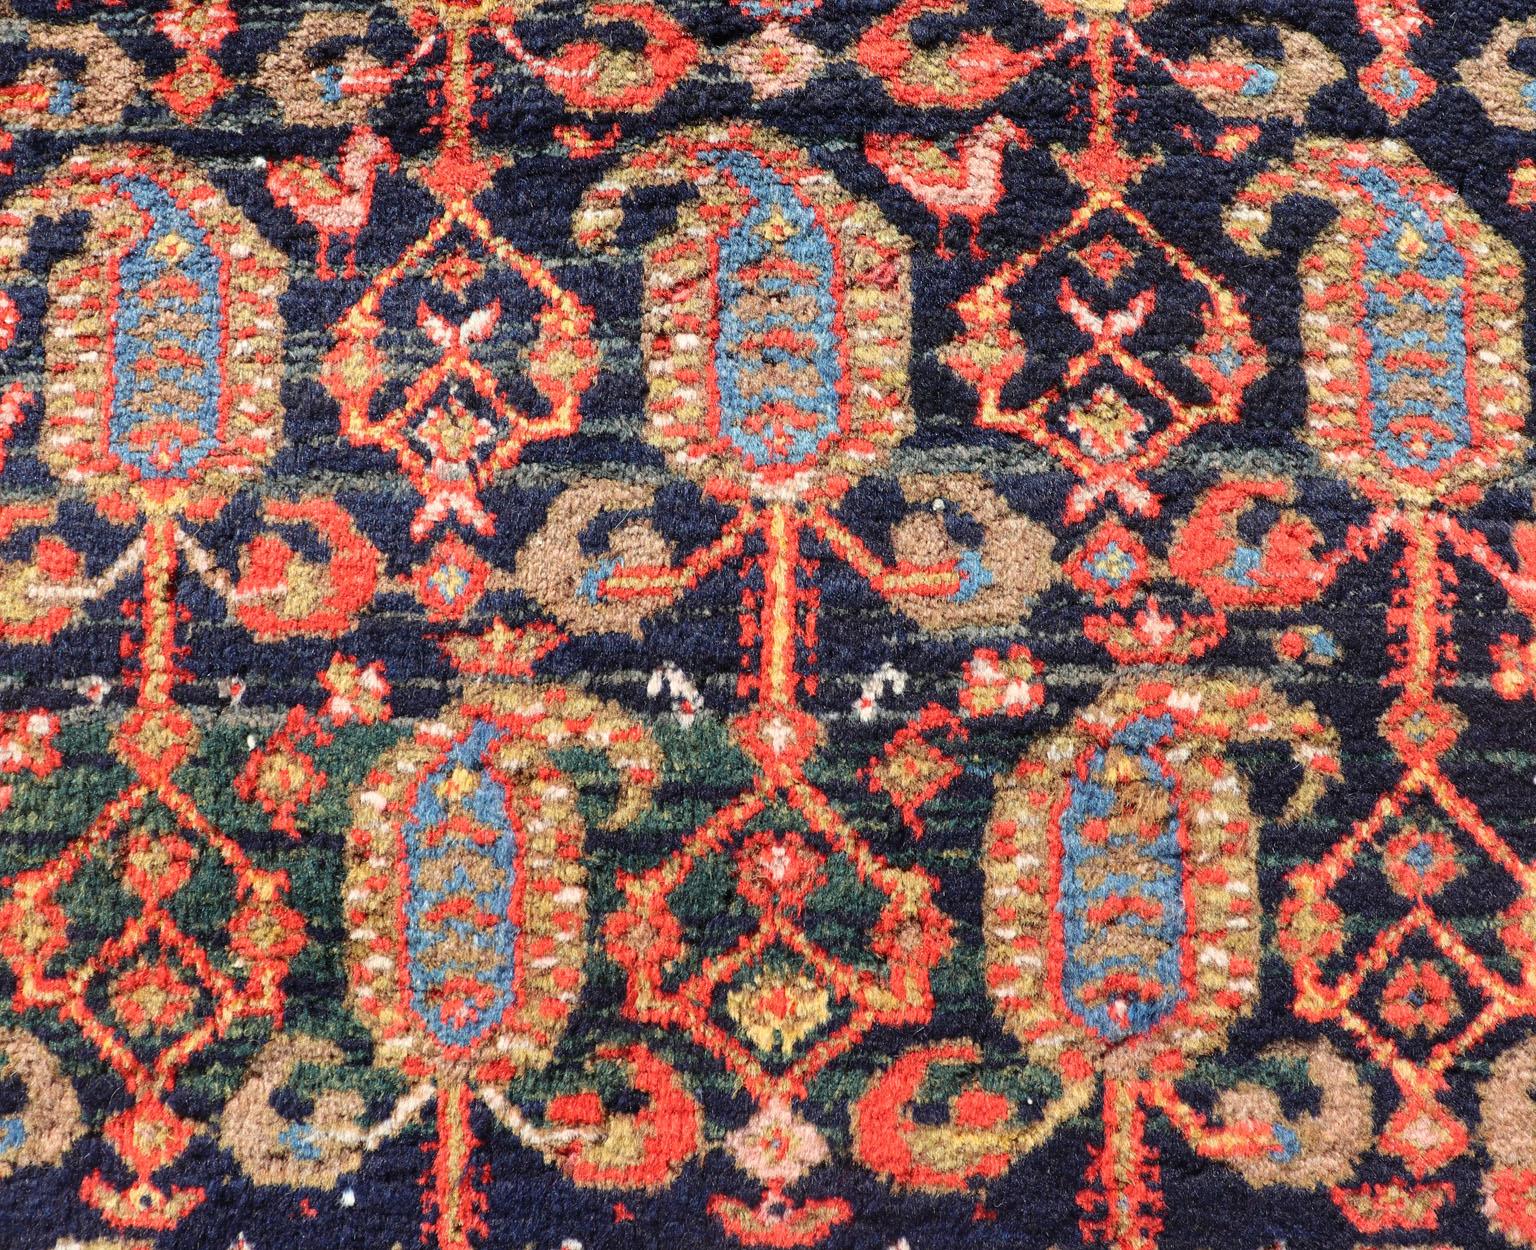 Long Antique Persian Hamadan Runner with All-Over Sub-Geometric Design For Sale 4